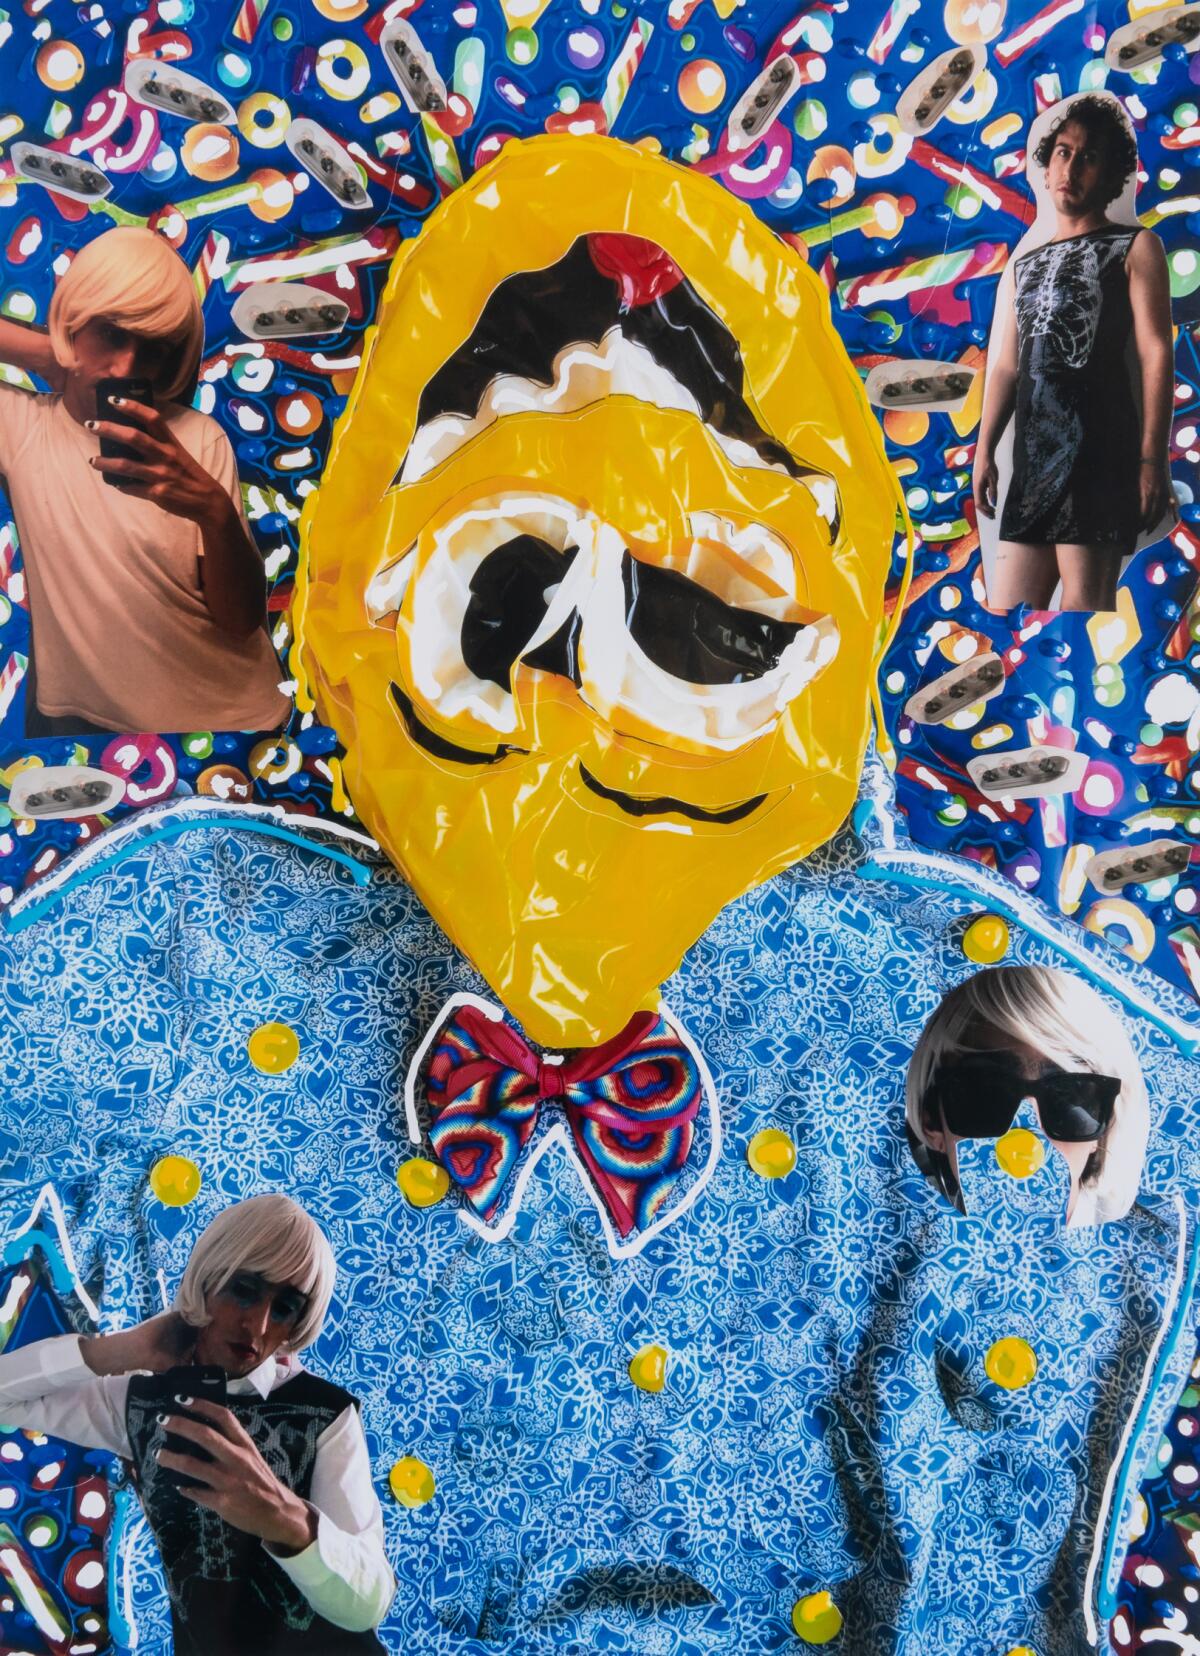 A collage shows a cartoonish figure with a bright yellow face surrounded by selfies of the artist